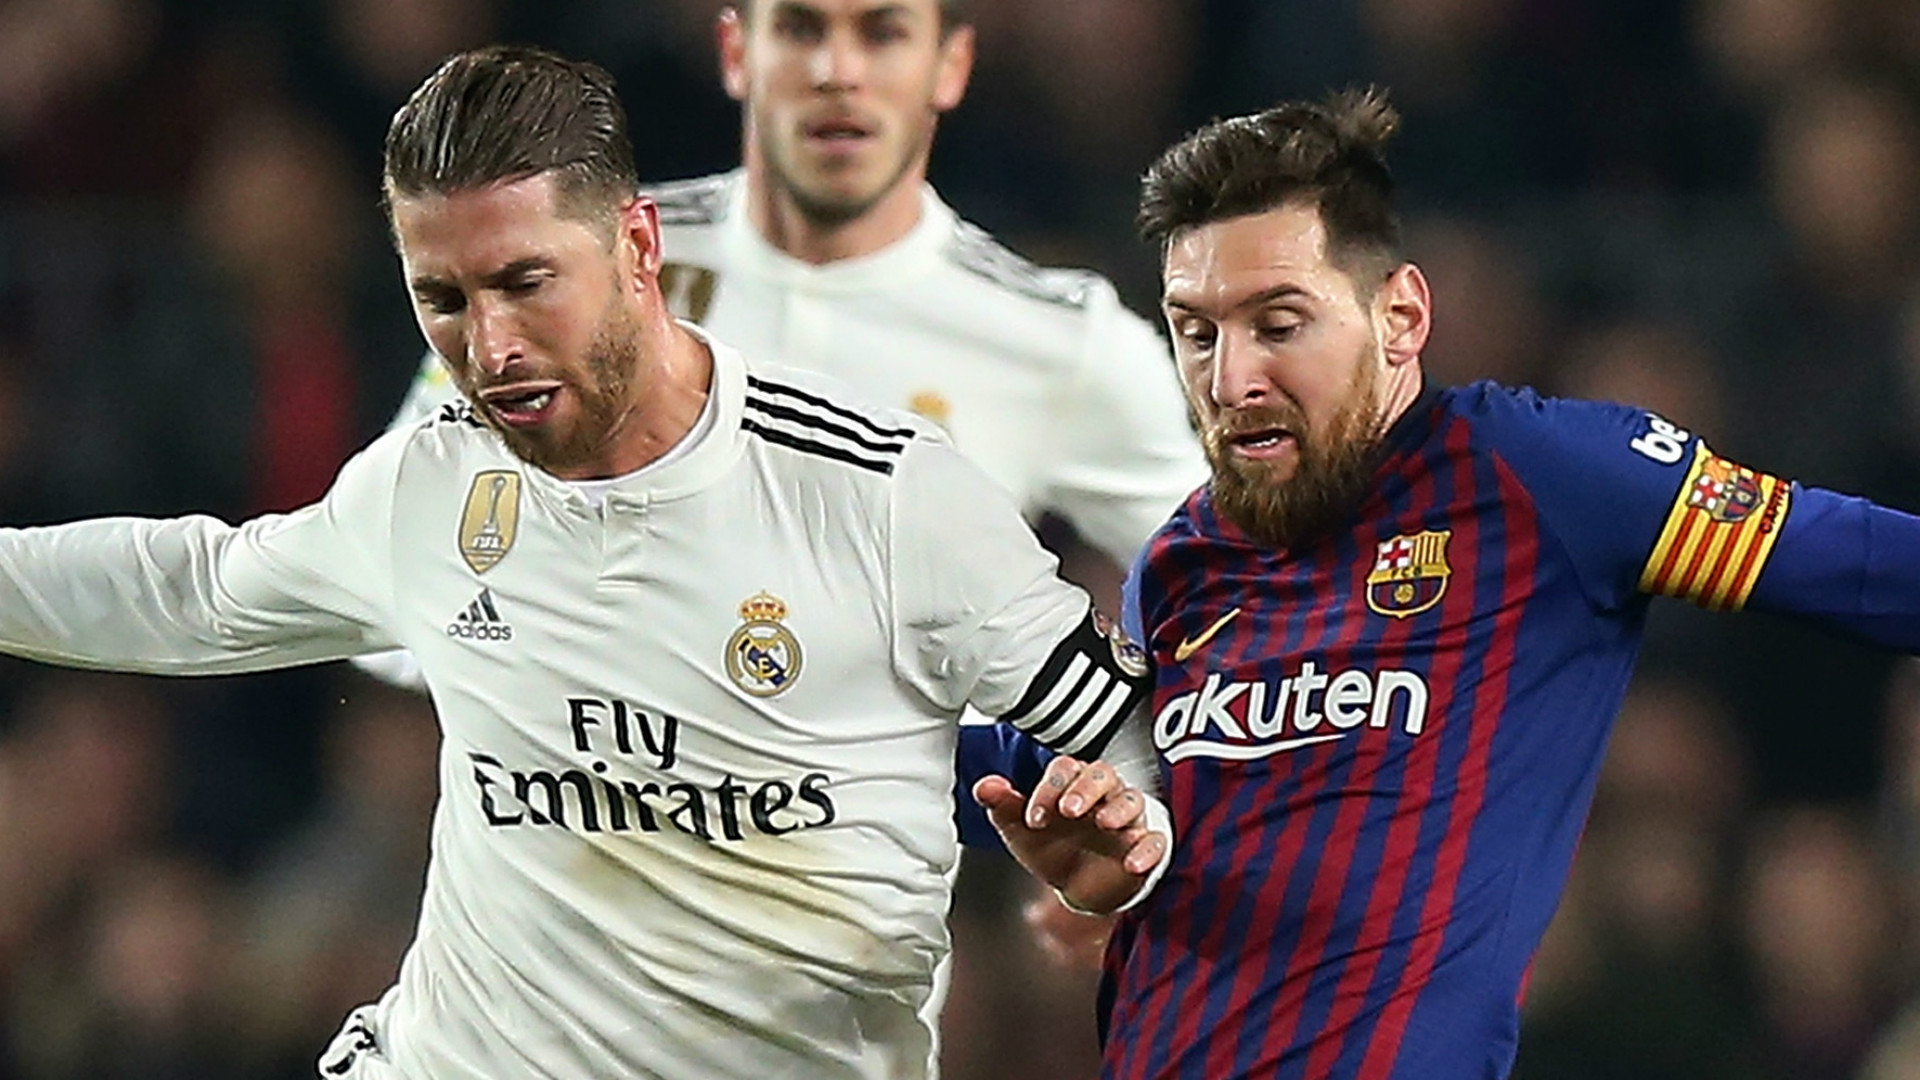 Barcelona Y Real Madrid 2019 , HD Wallpaper & Backgrounds